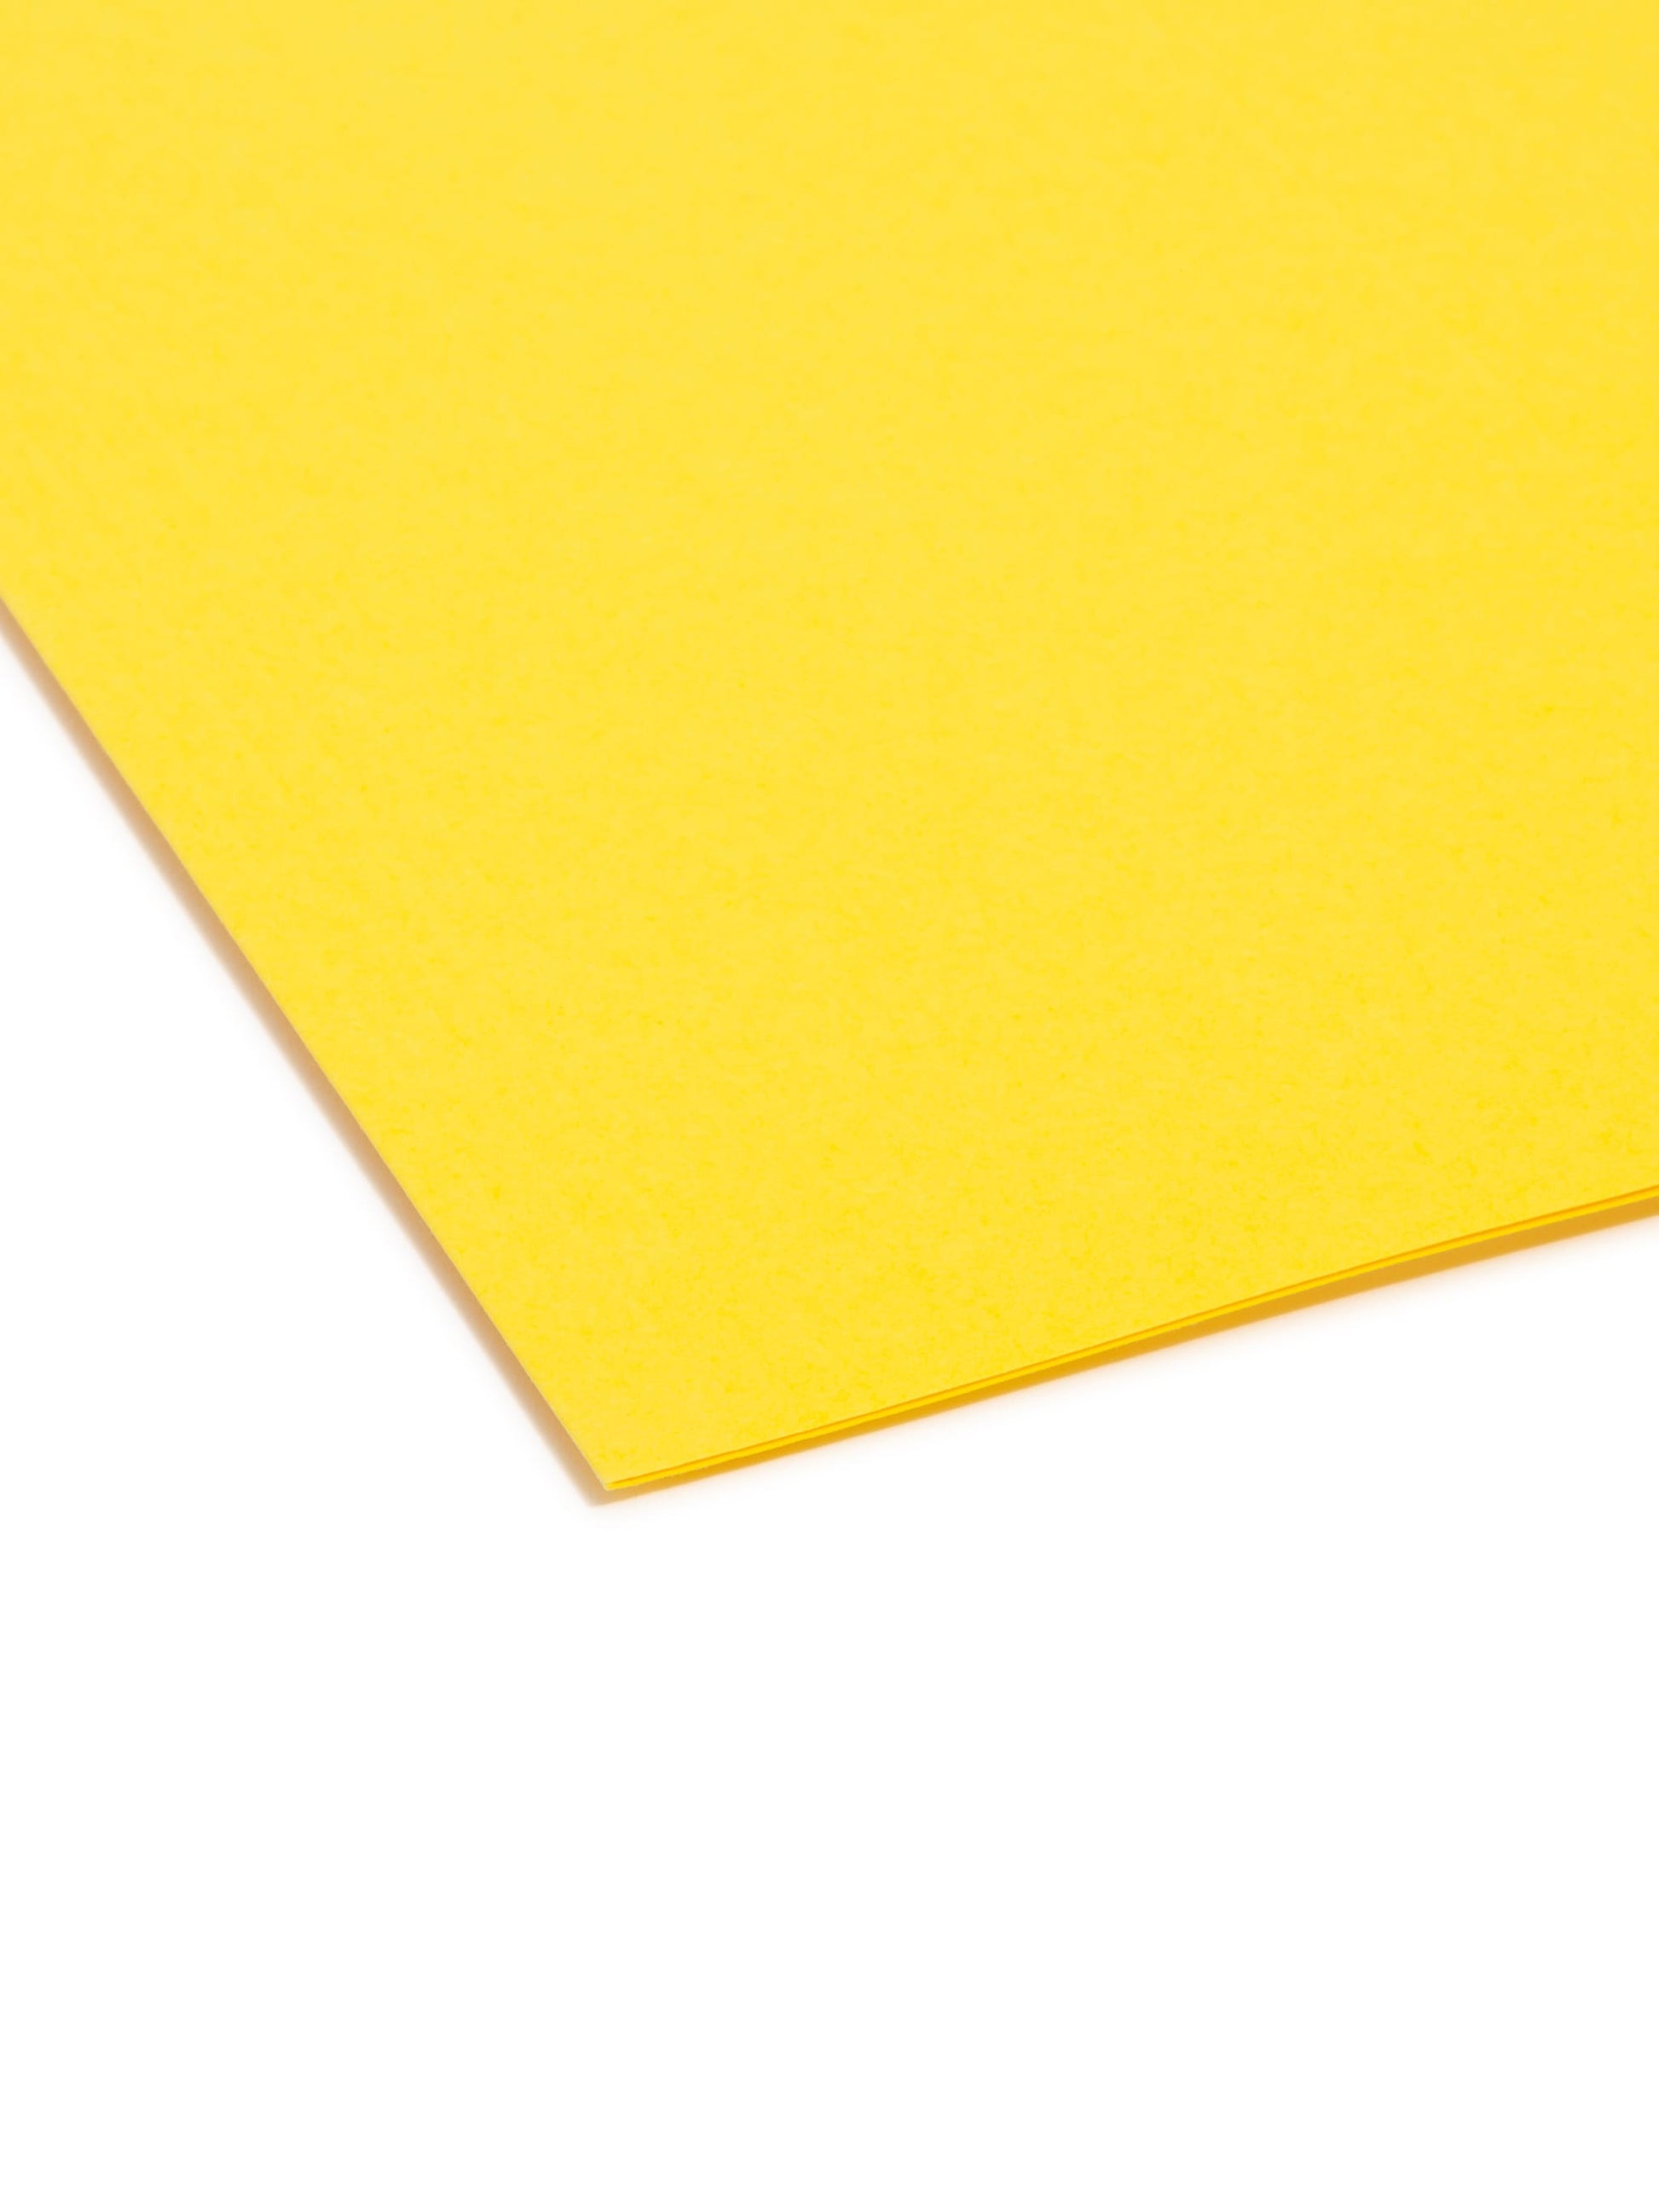 TUFF® Hanging File Folders with Easy Slide® Tabs, Yellow Color, Letter Size, Set of 18, 086486640442